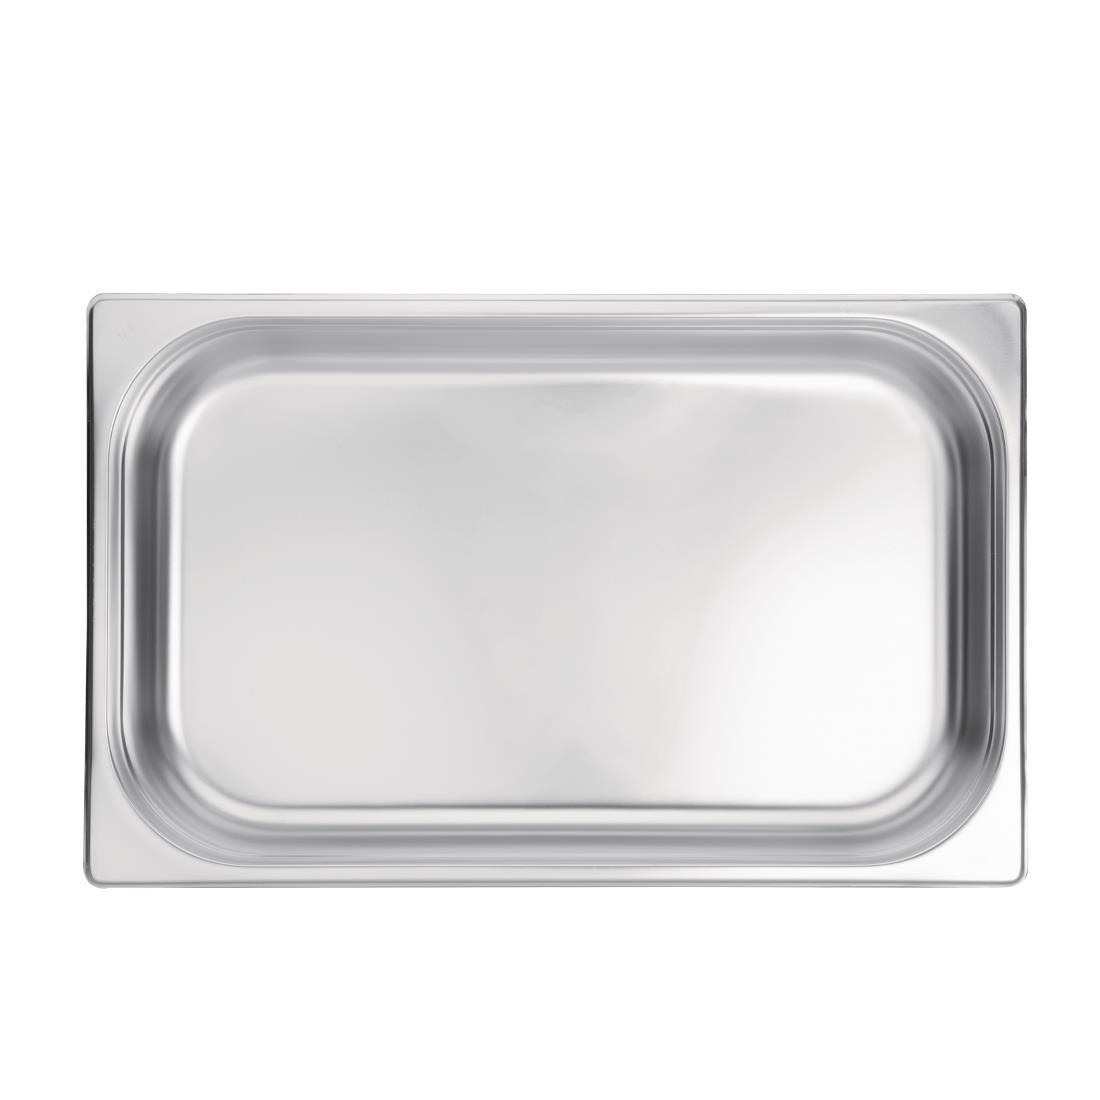 Vogue Stainless Steel 1/1 Gastronorm Pan 100mm - K923  - 7